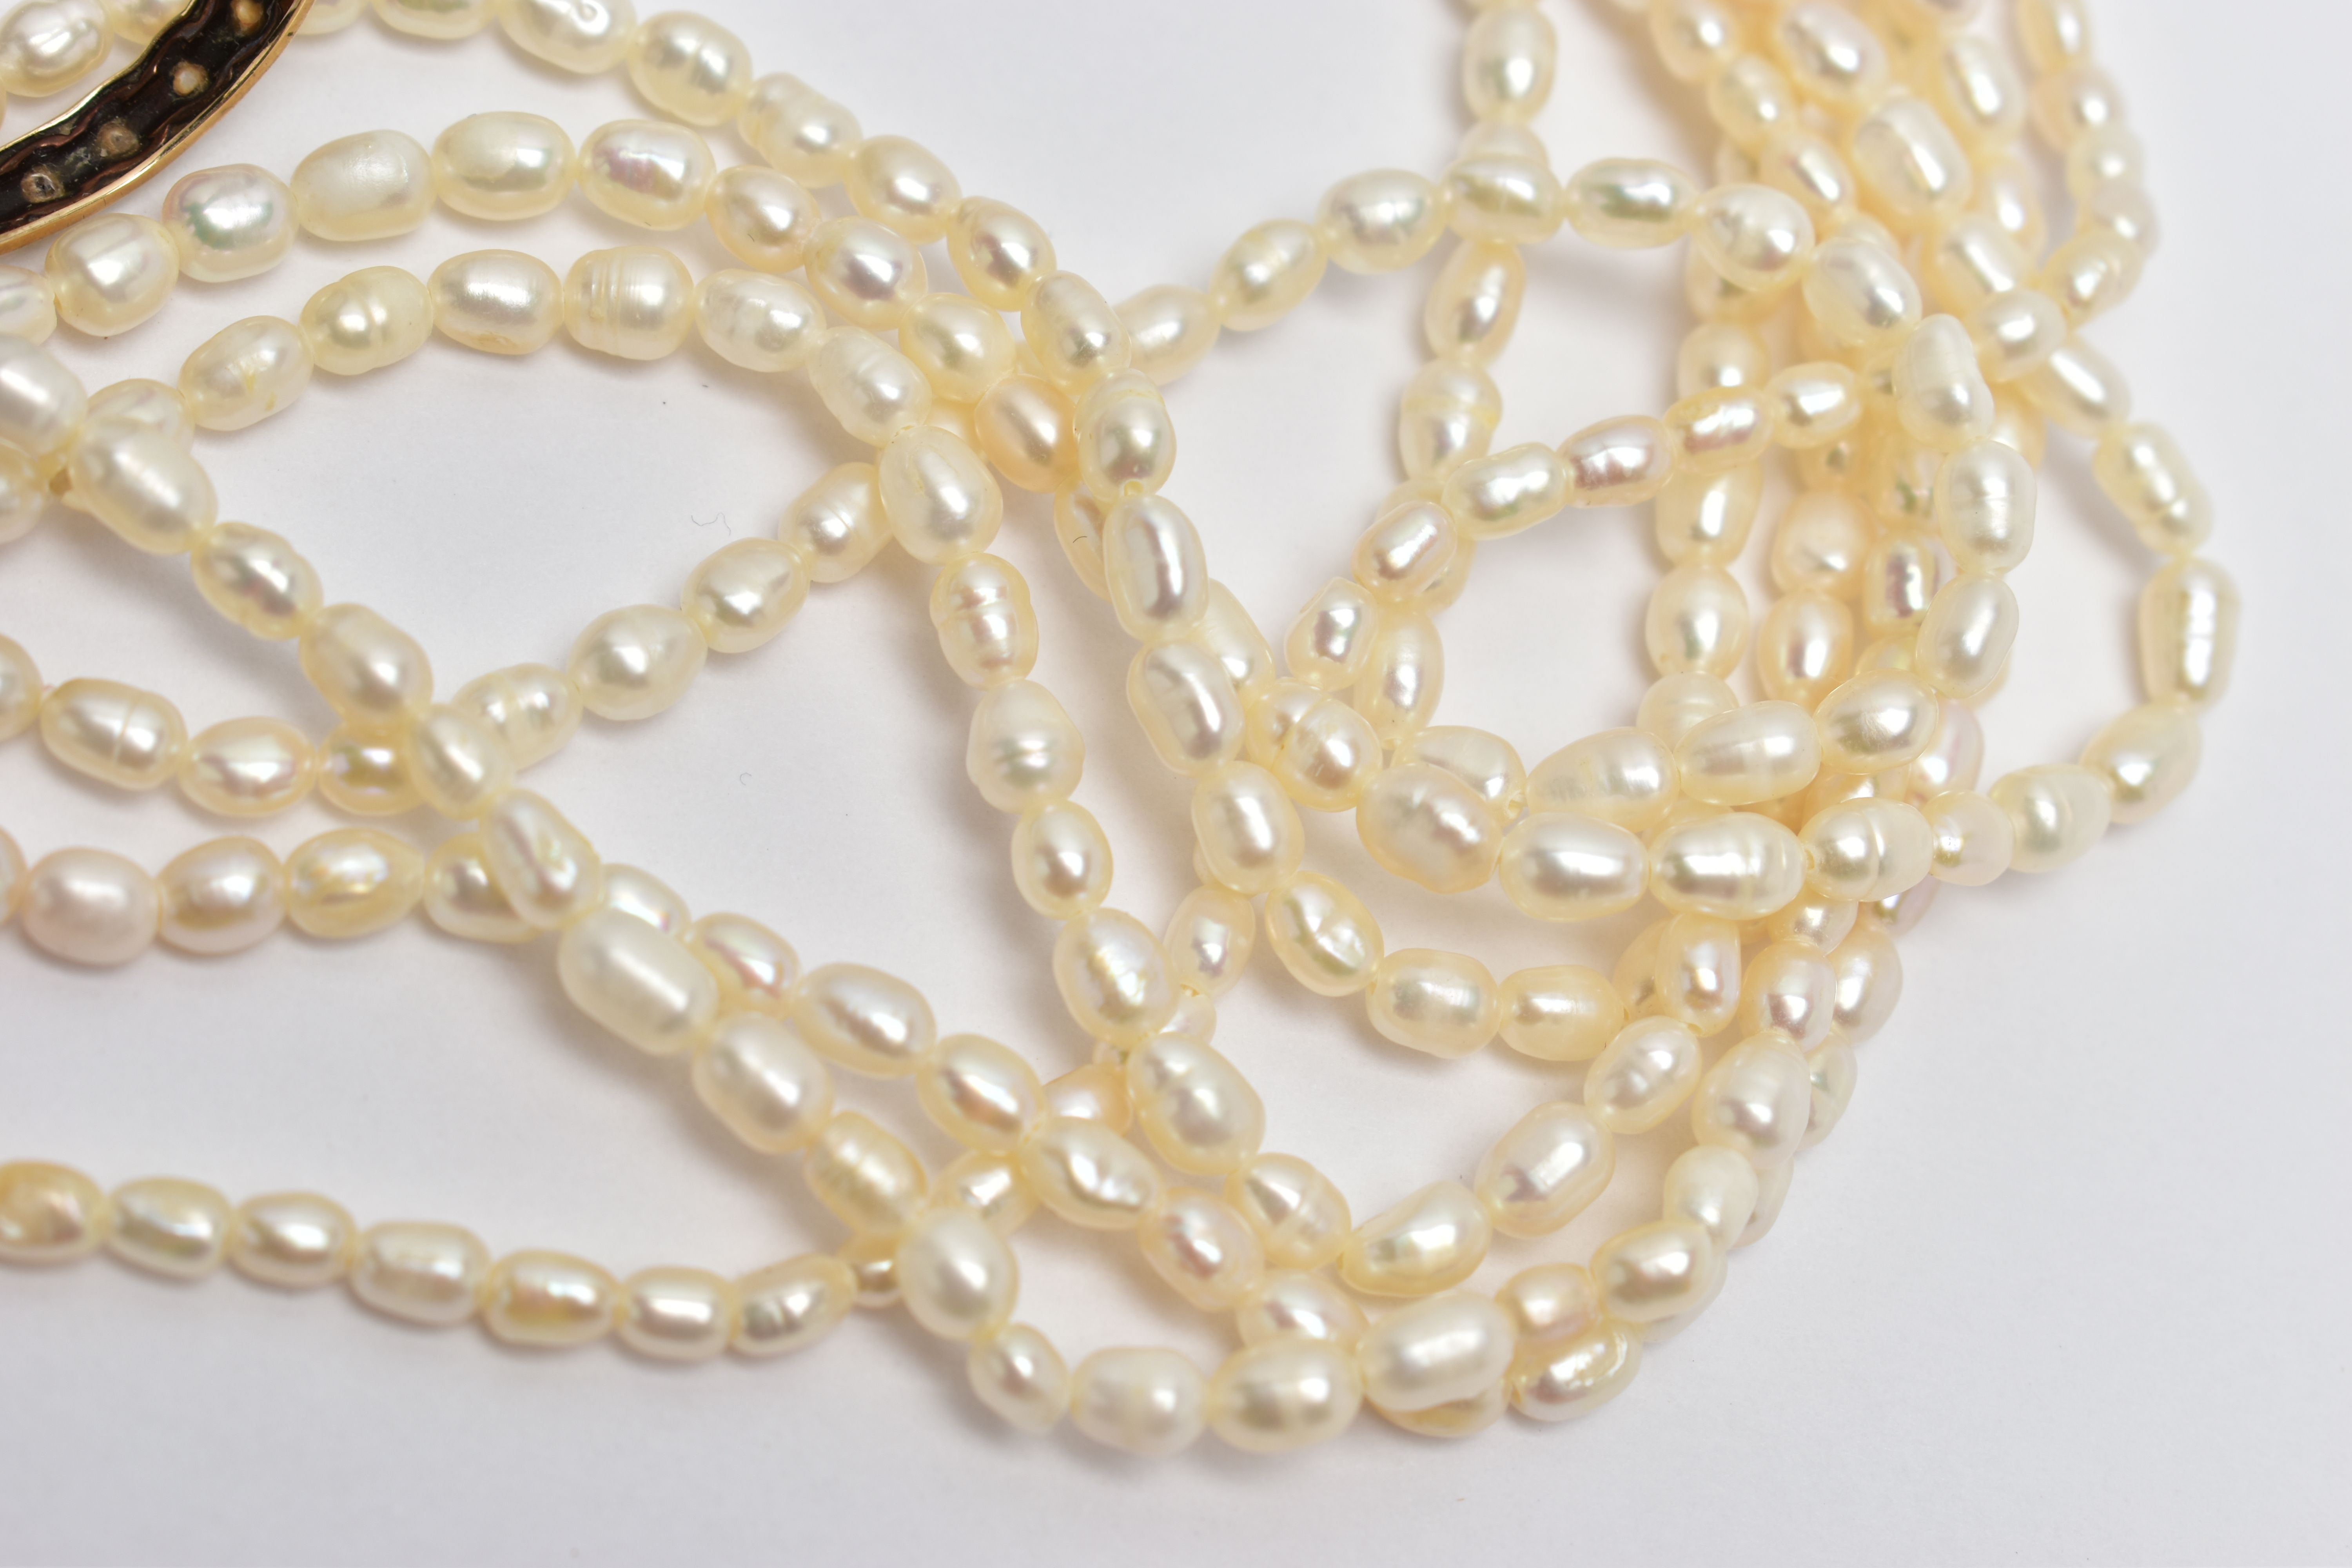 A YELLOW METAL FULL ETERNITY RING AND A CULTURED PEARL NECKLACE, worn yellow metal full eternity - Image 4 of 5